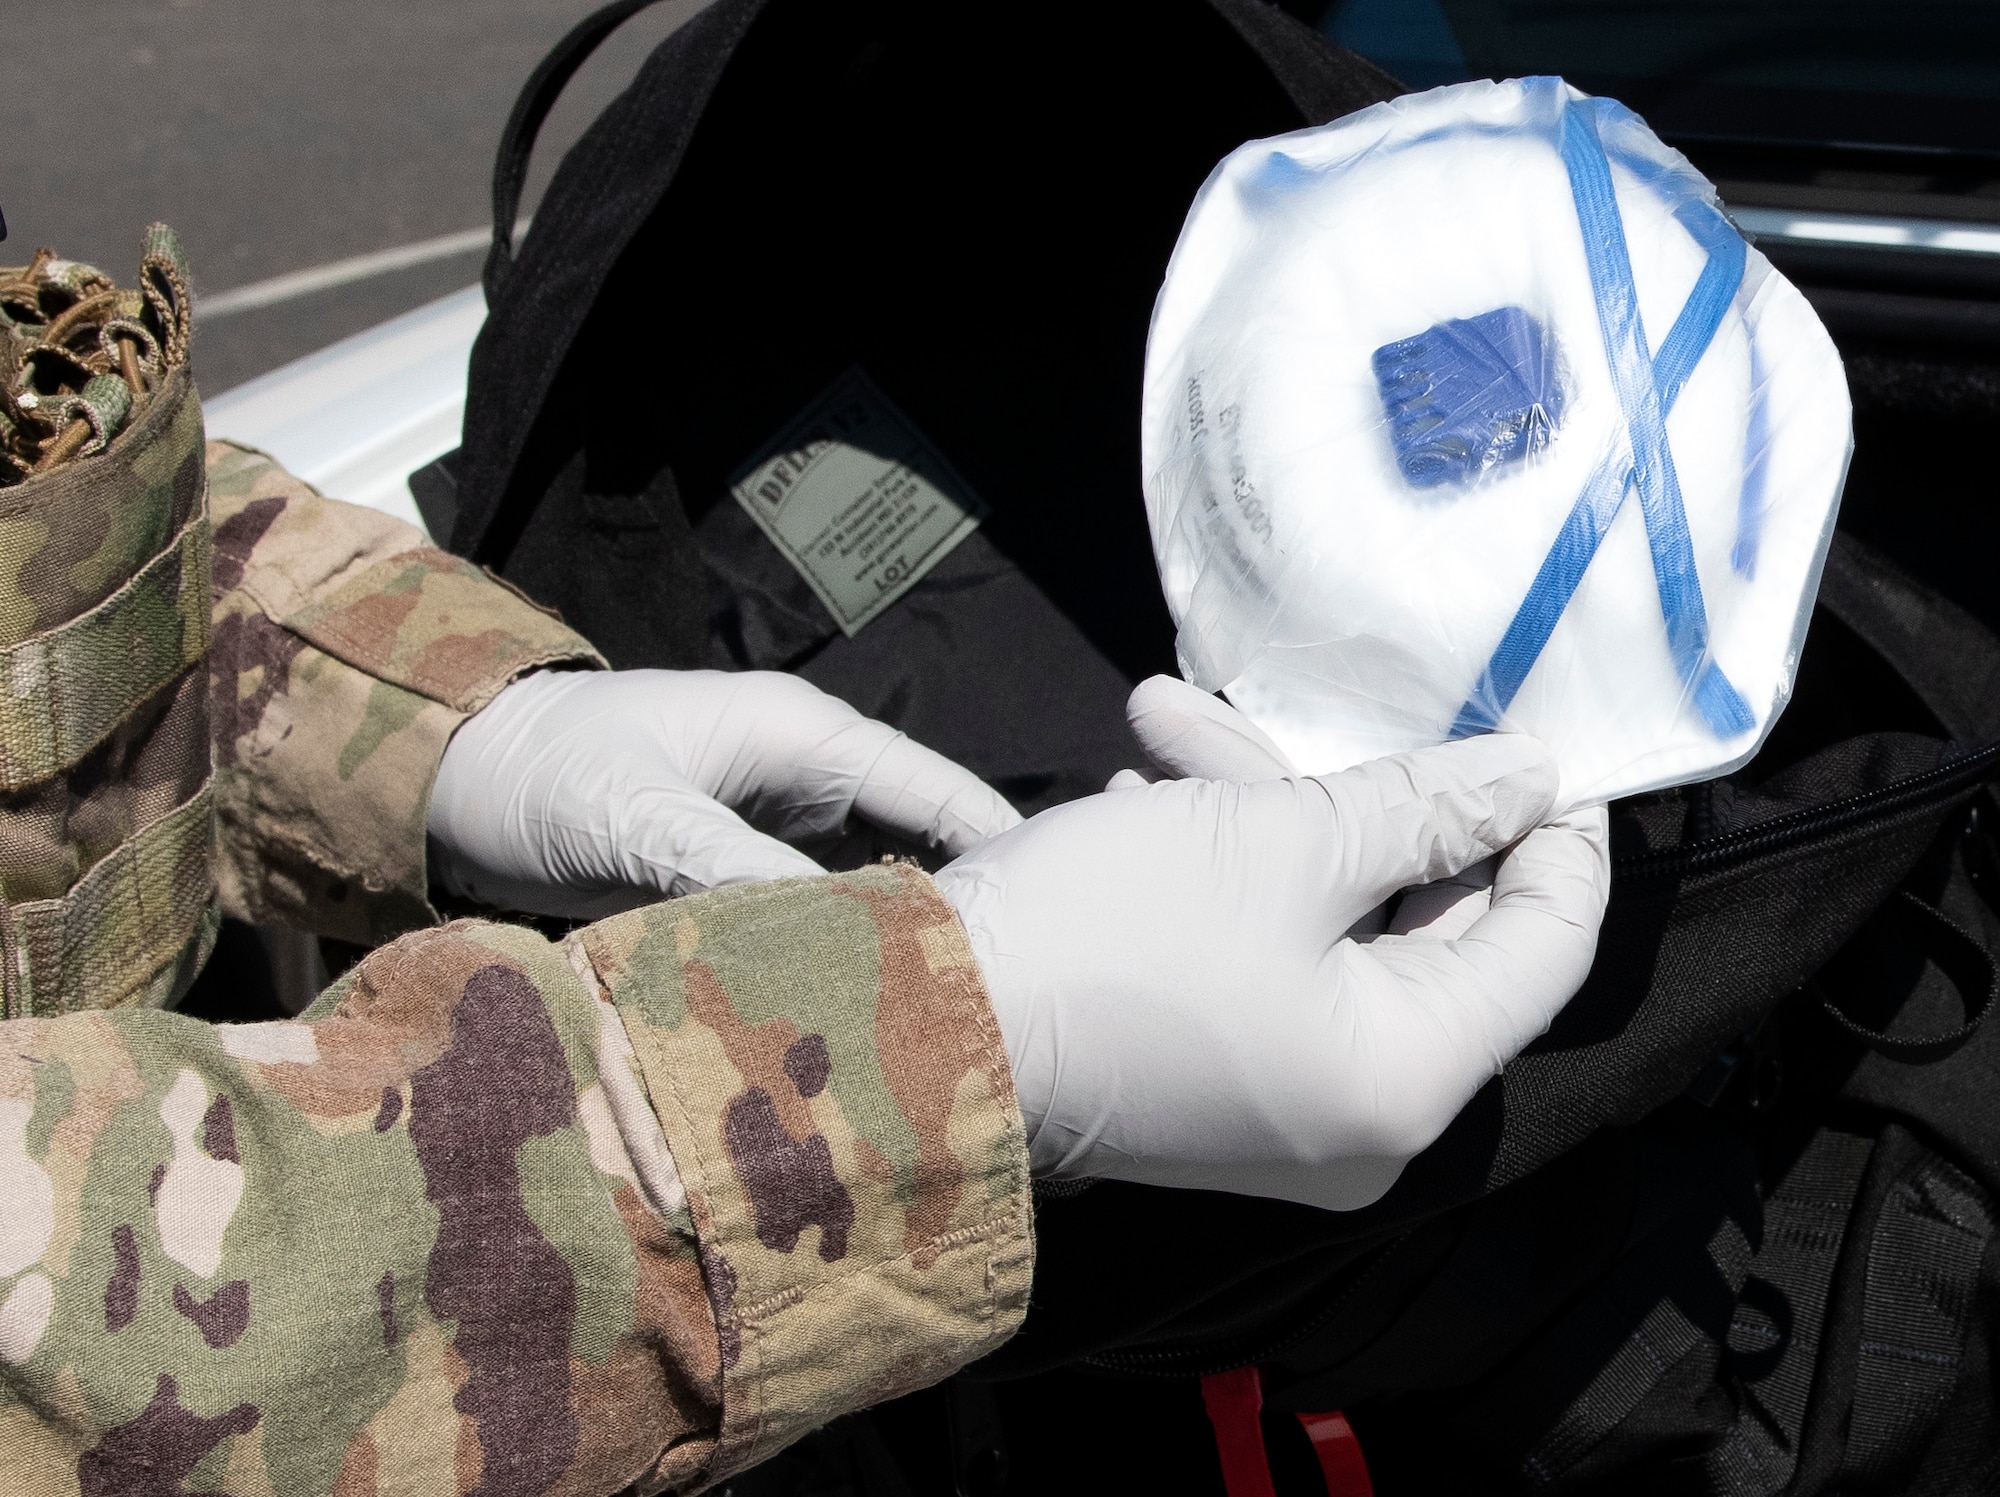 Senior Airman Jeffrey Clark, a 48th Security Forces Squadron response force leader, puts a respirator mask inside a COVID-19 response kit at Royal Air Force Lakenheath, England, April 16, 2020. Due to the nature of their mission, 48th SFS Defenders are equipped to take extra precautions during high-risk situations where they may not be able to maintain proper distance or fully avoid person-to-person contact. (U.S. Air Force photo by Airman 1st Class Jessi Monte)